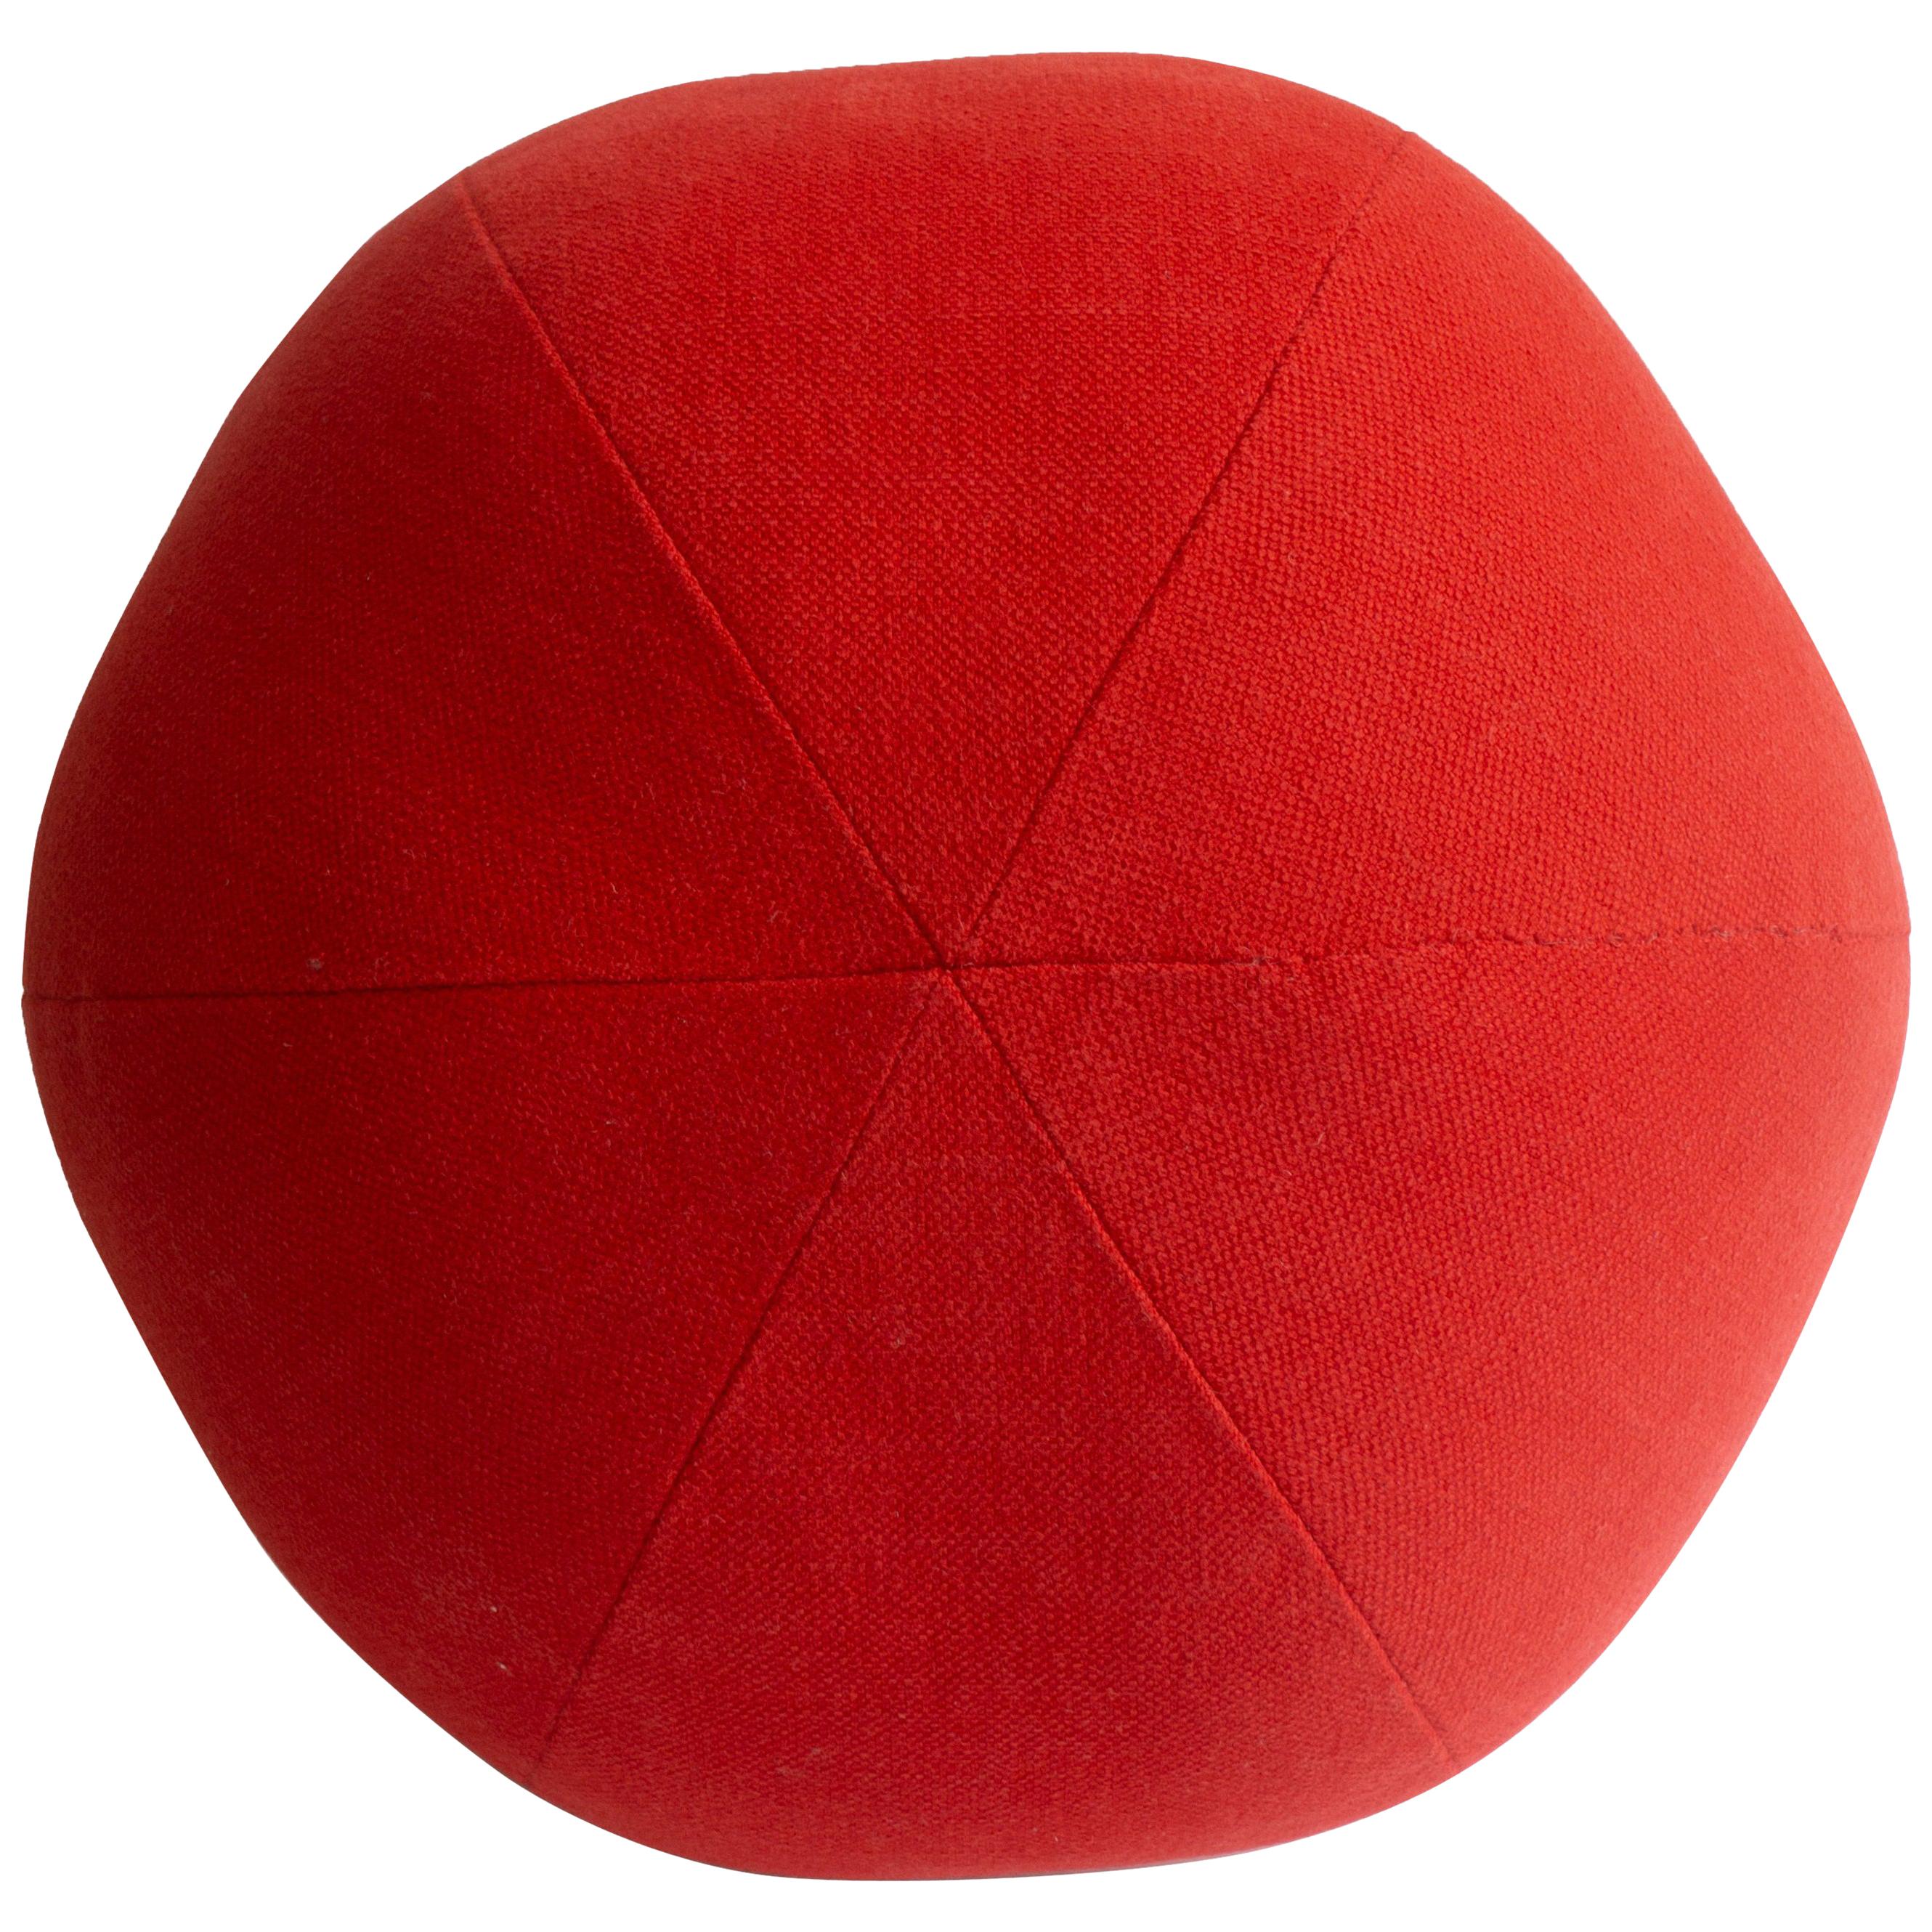 Bright Red Round Ball Throw Pillow For, Round Ball Pillows